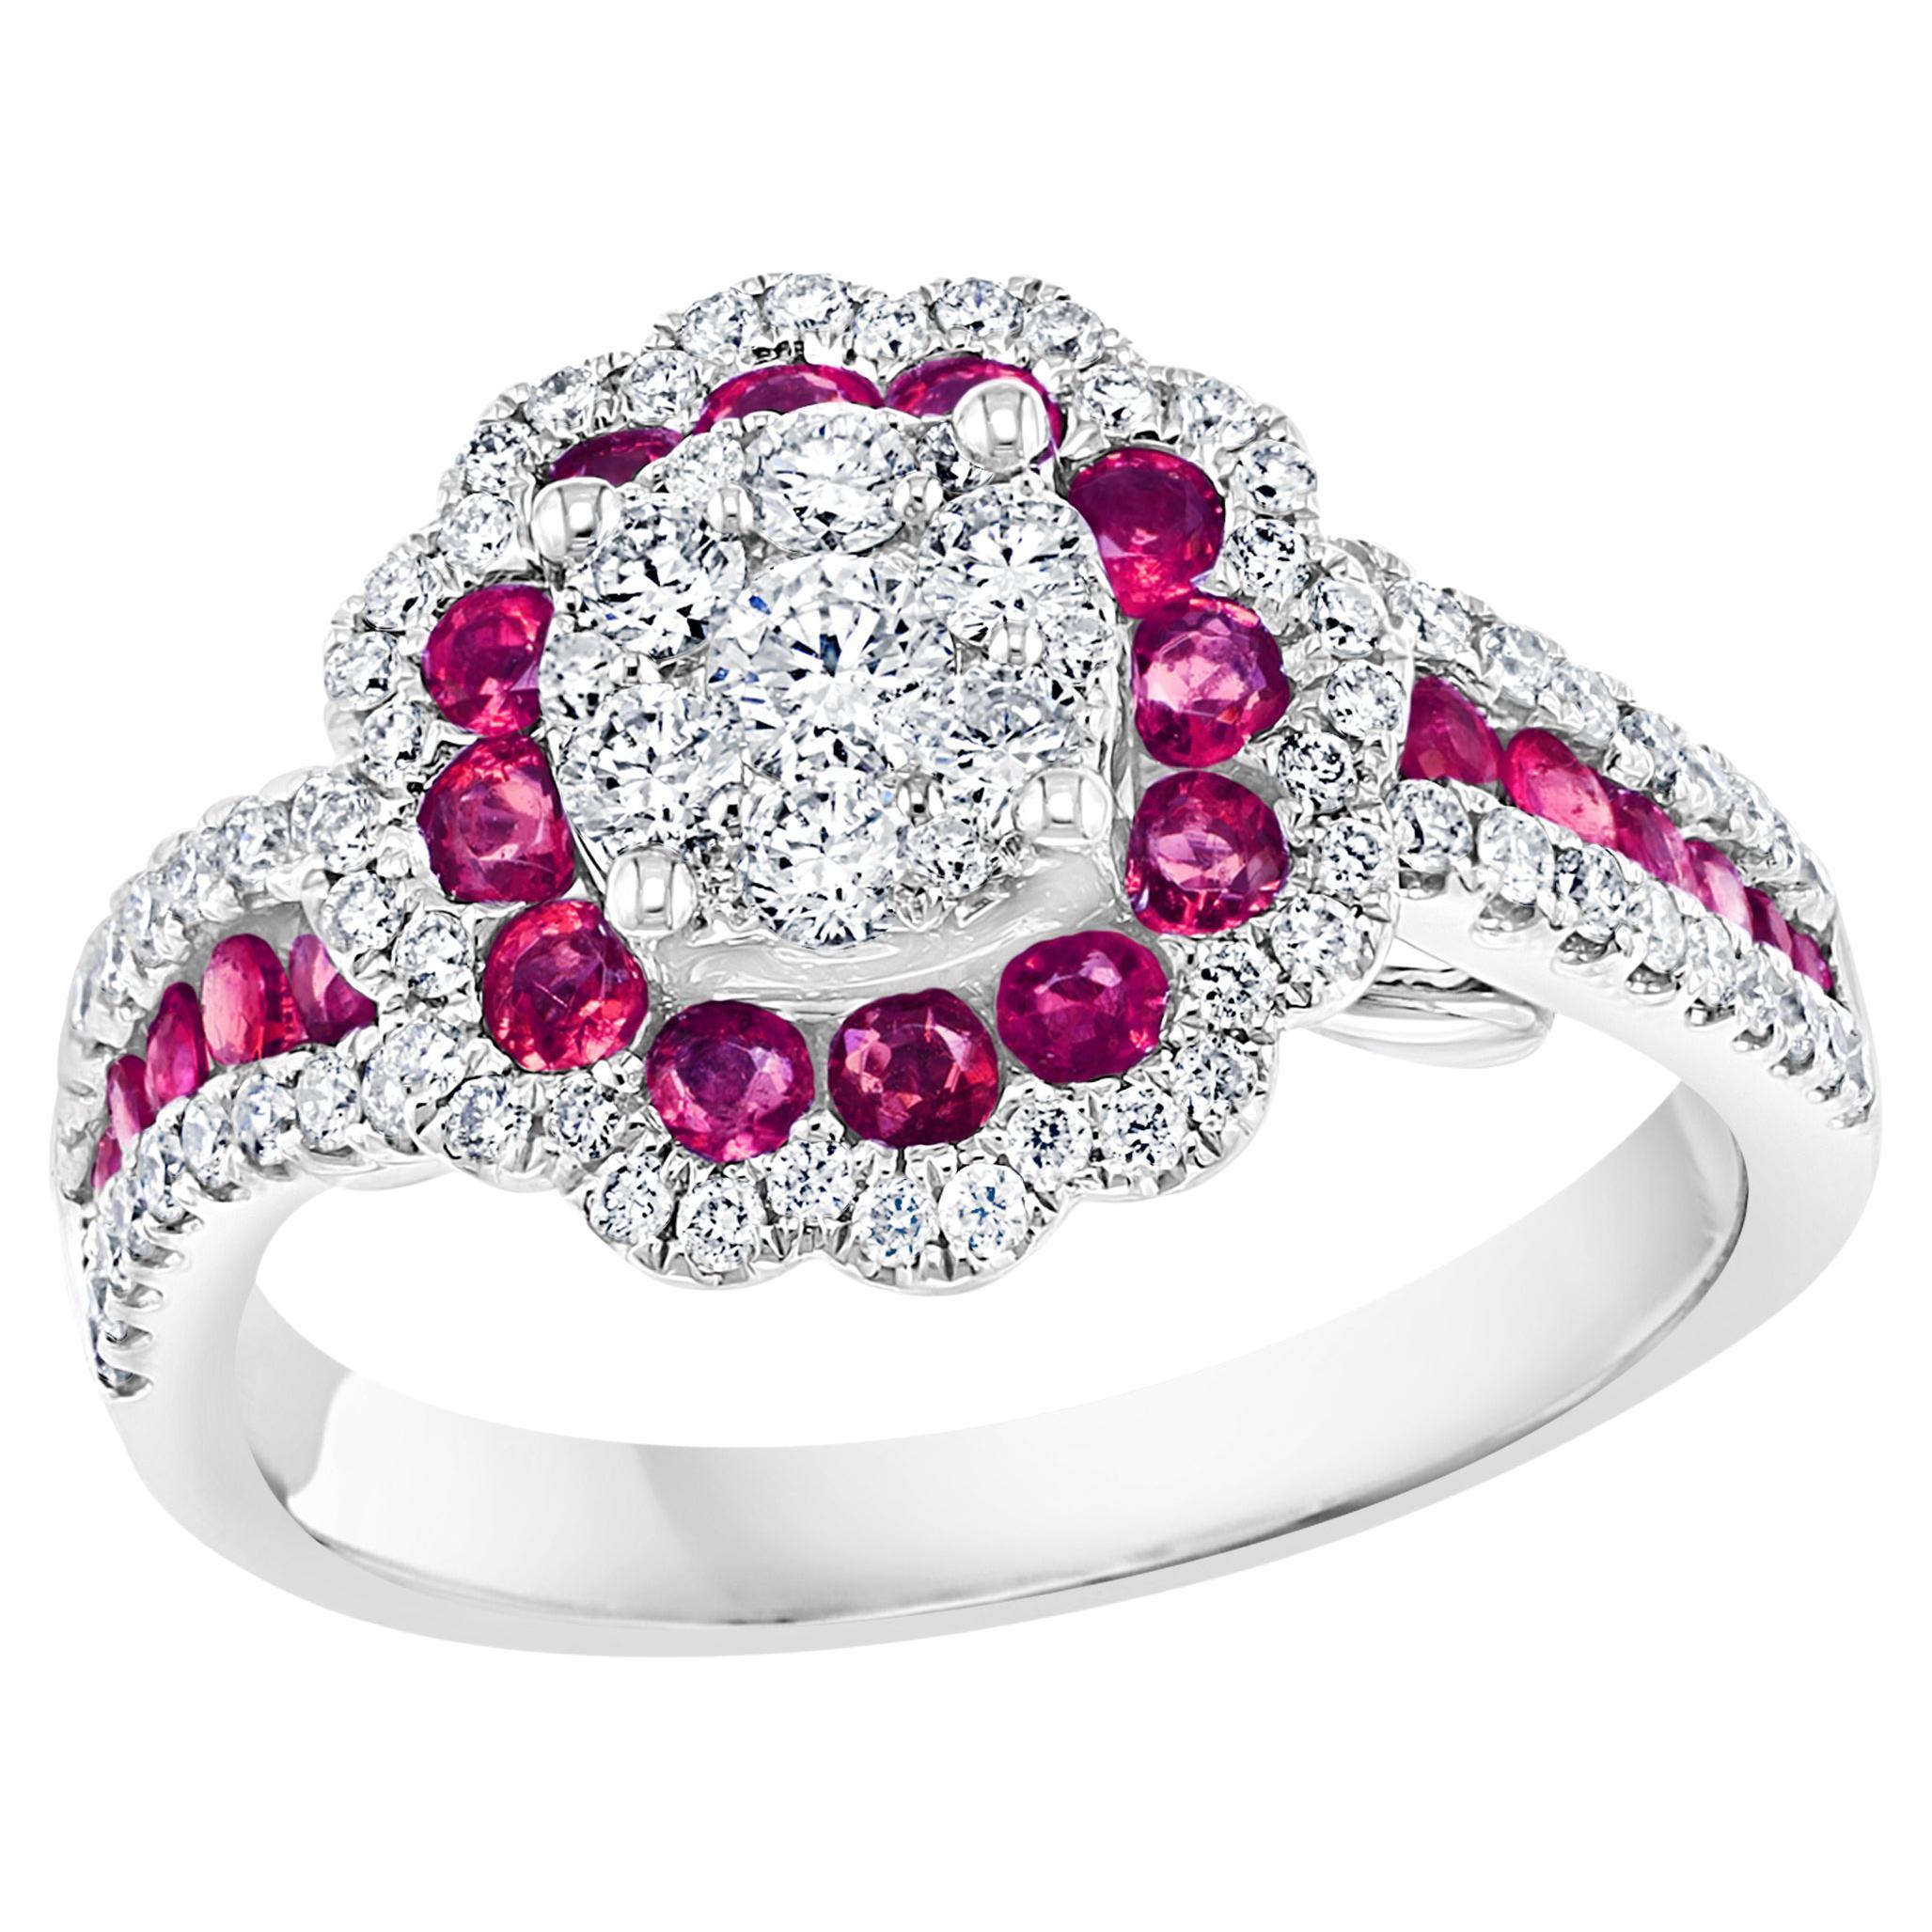 0.73 Carat of Ruby and Diamond Cocktail Ring in 18K White Gold